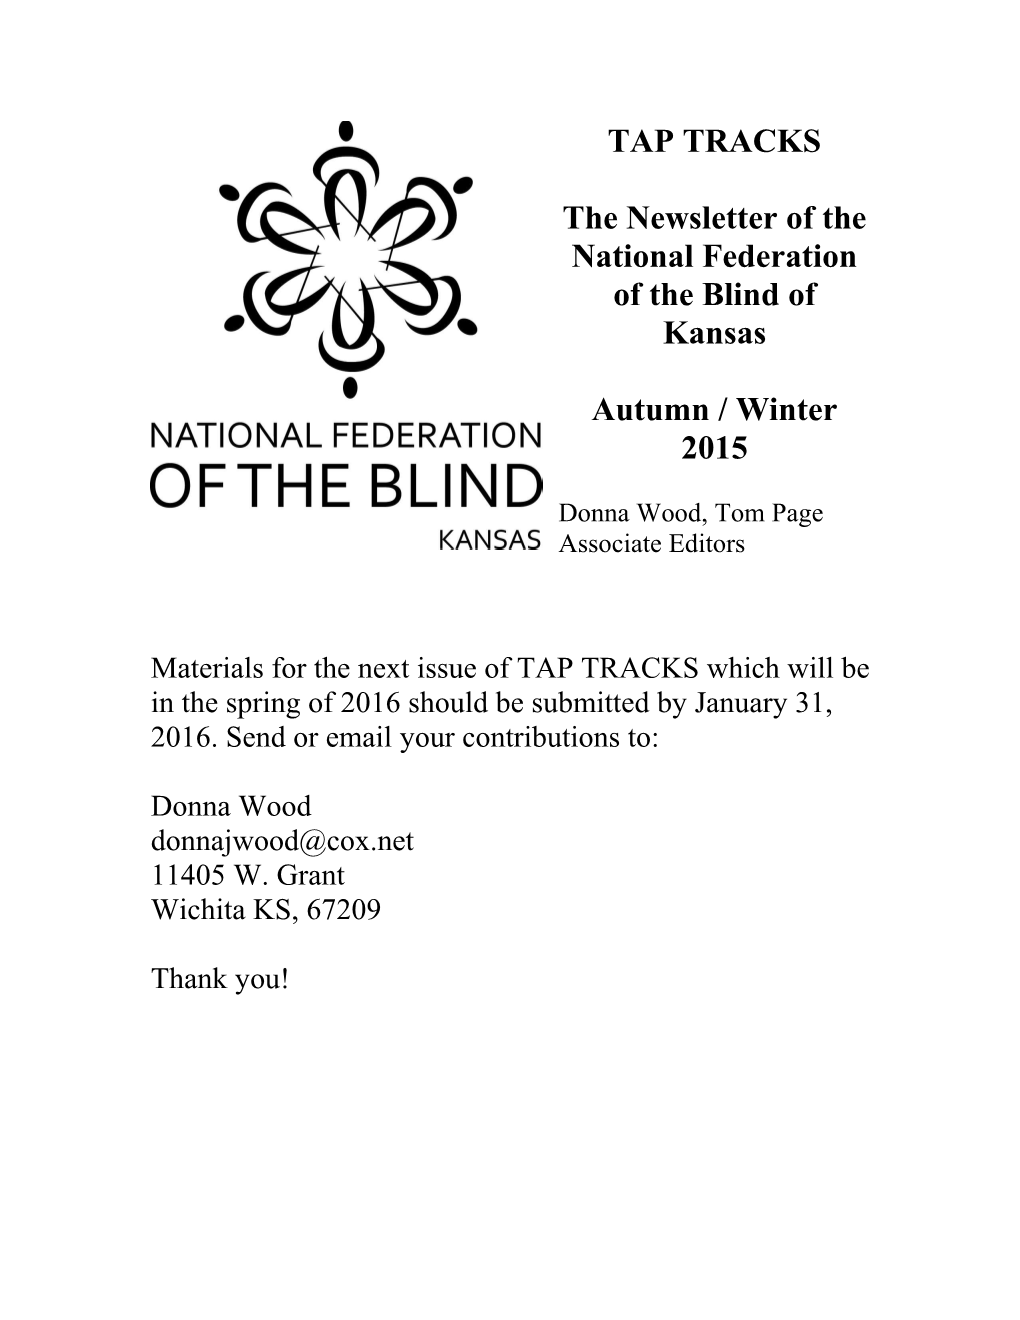 National Federation of the Blind of Kansas